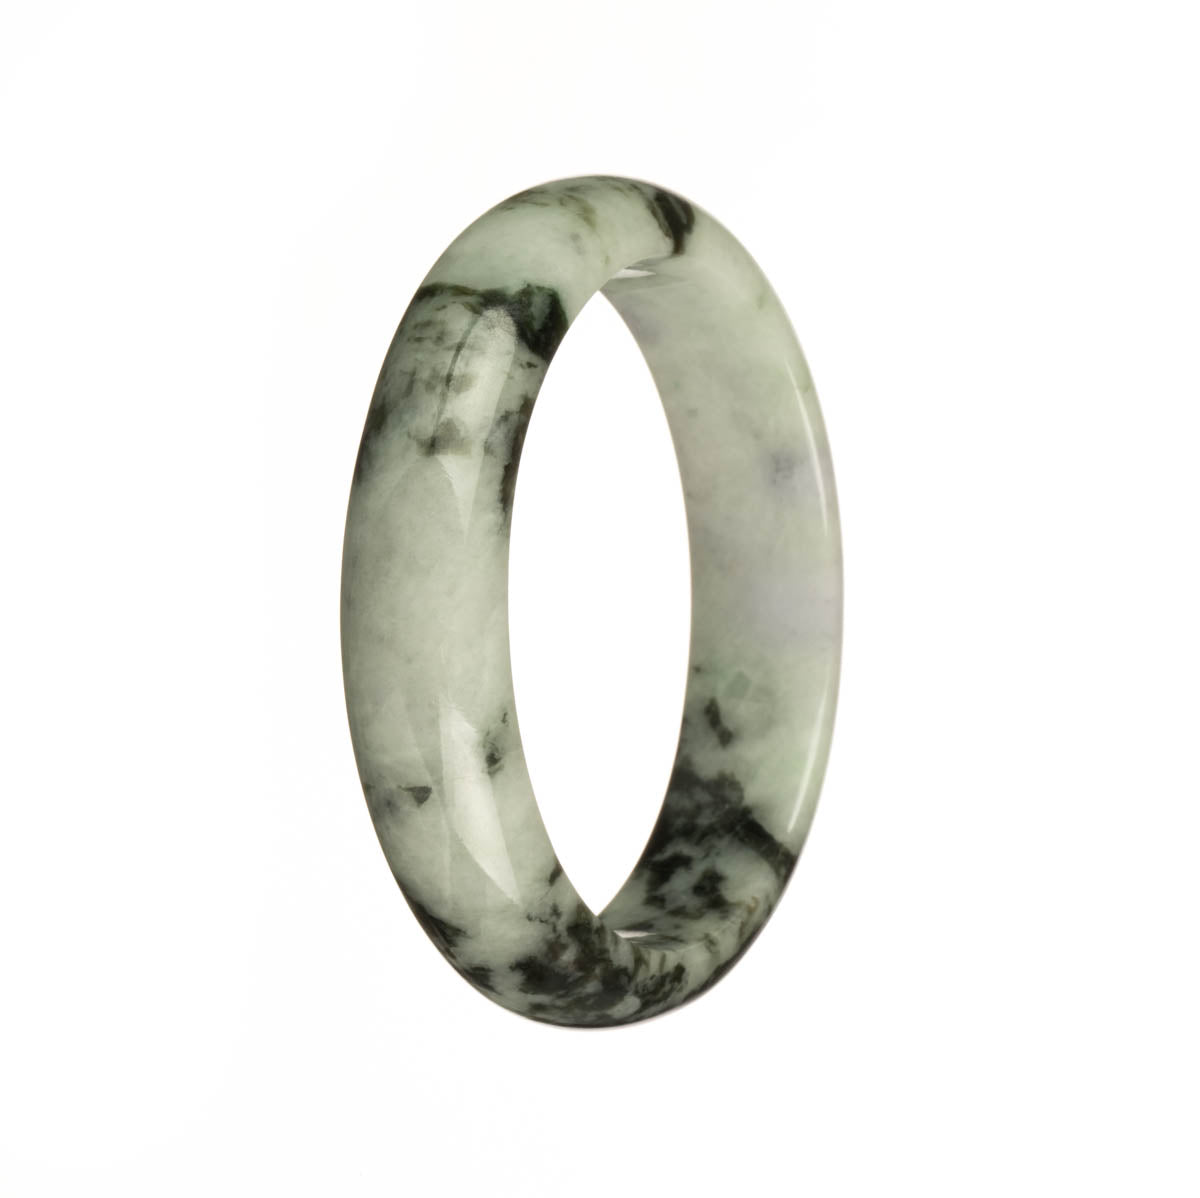 A close-up photo of a Real Grade A Pale Green with Green Pattern Traditional Jade Bracelet. The bracelet is 54mm in size and has a half-moon shape. It is crafted by MAYS.